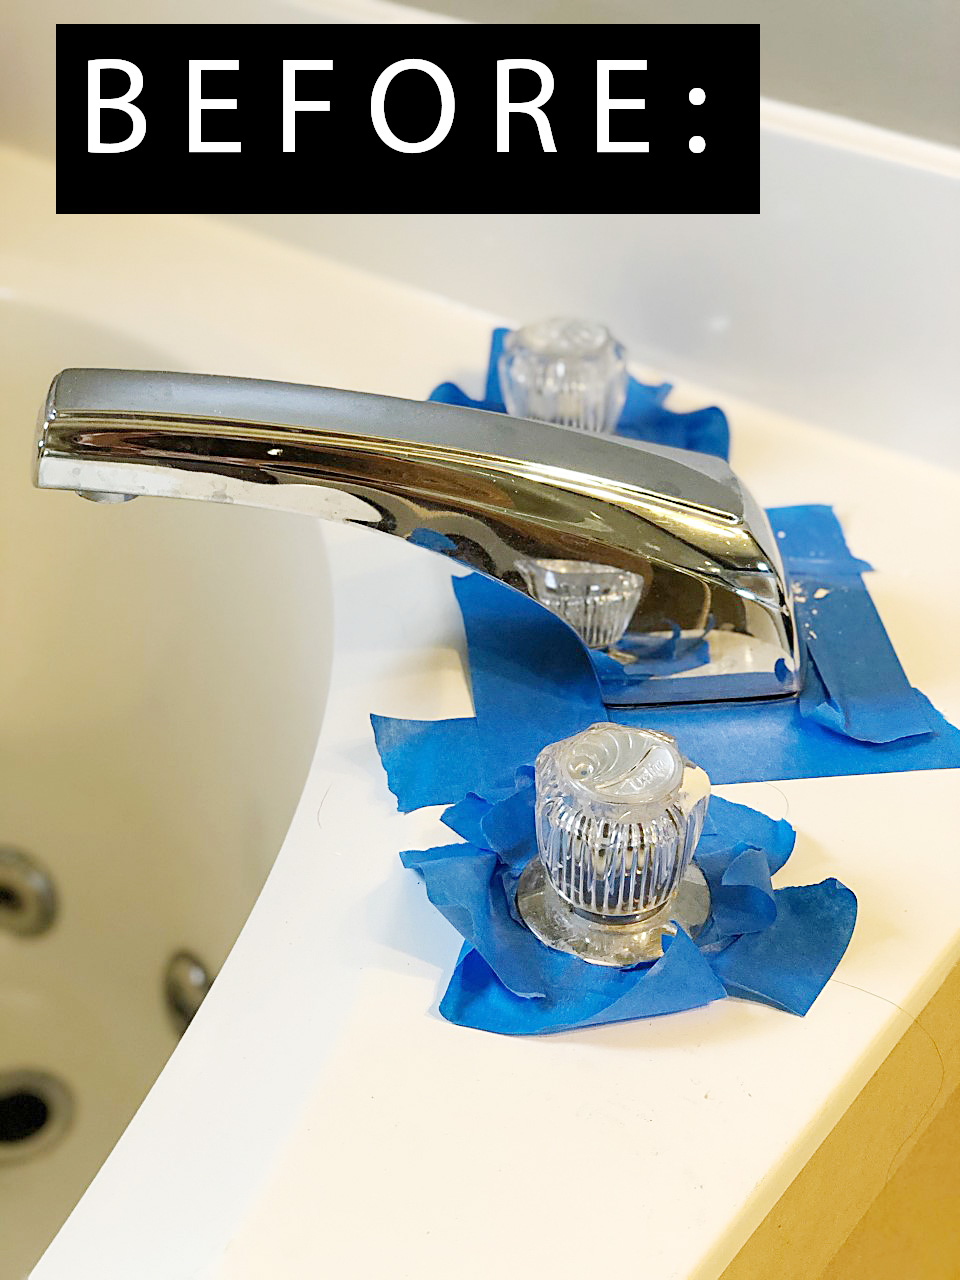 Diy Faucet Transformation For Under 15, Can You Use Regular Spray Paint On Bathtub Fixtures